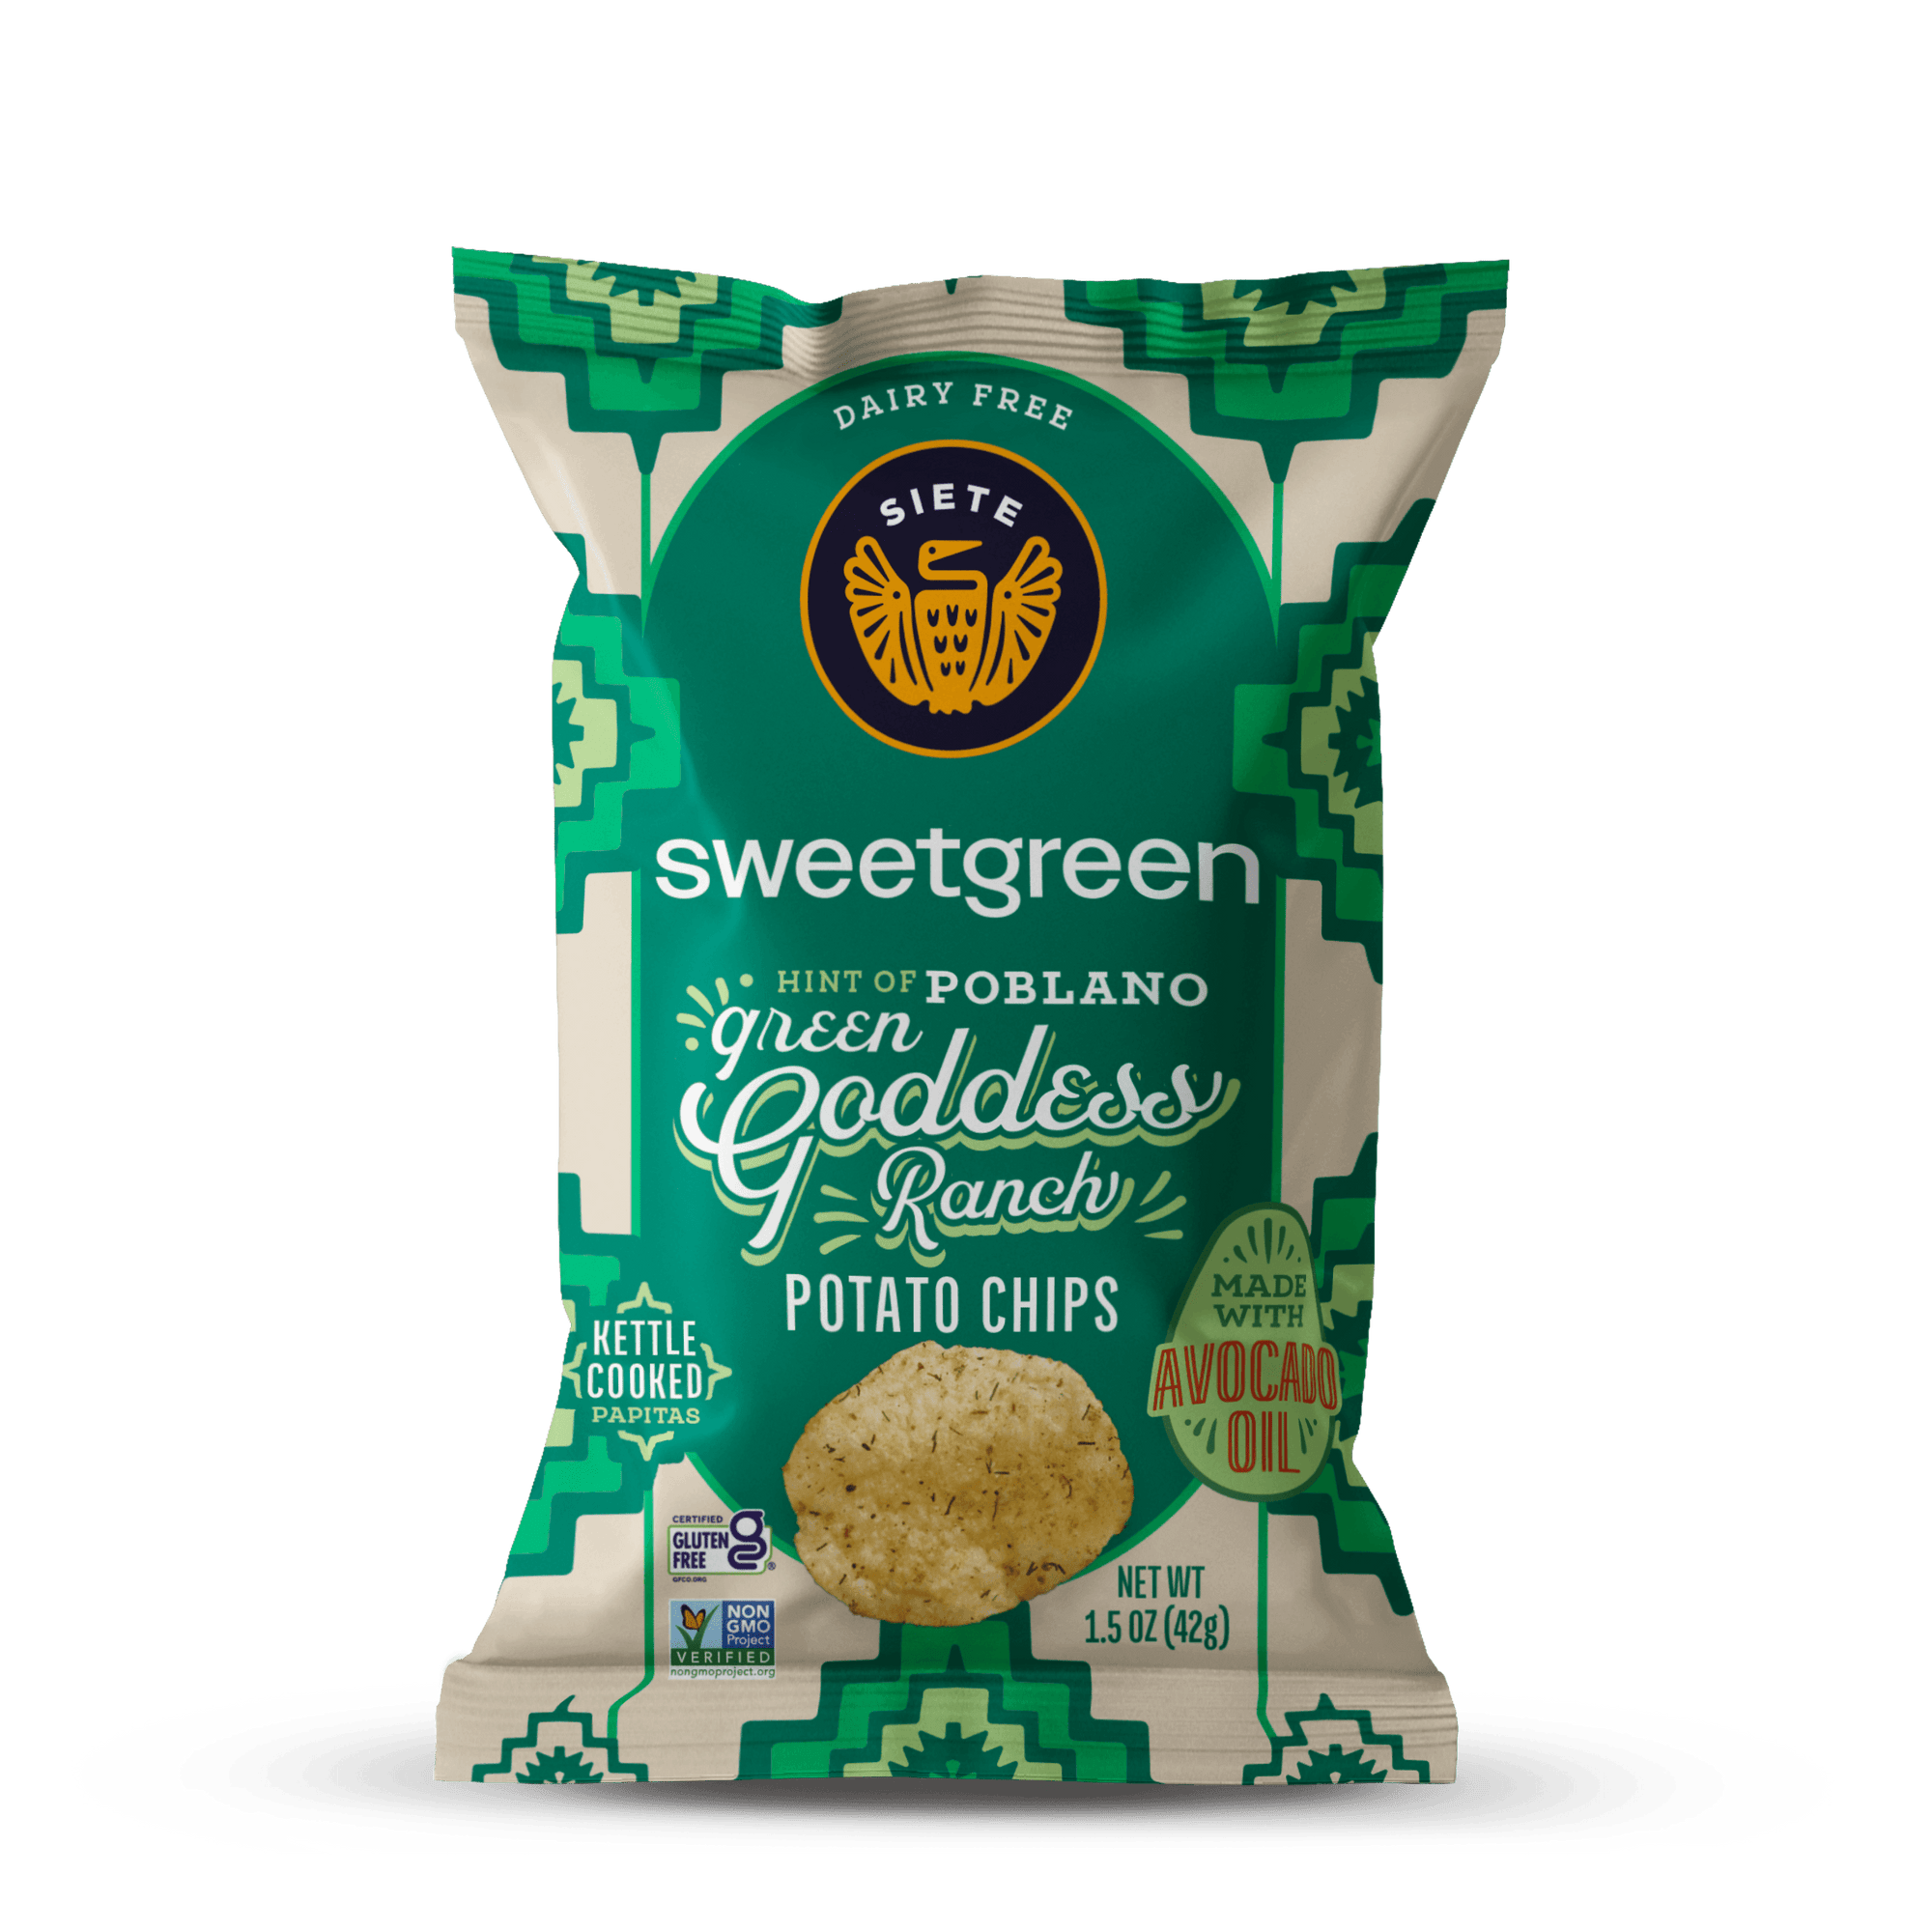 Siete x Sweetgreen Green Goddess Ranch with a Hint of Poblano Potato Chips